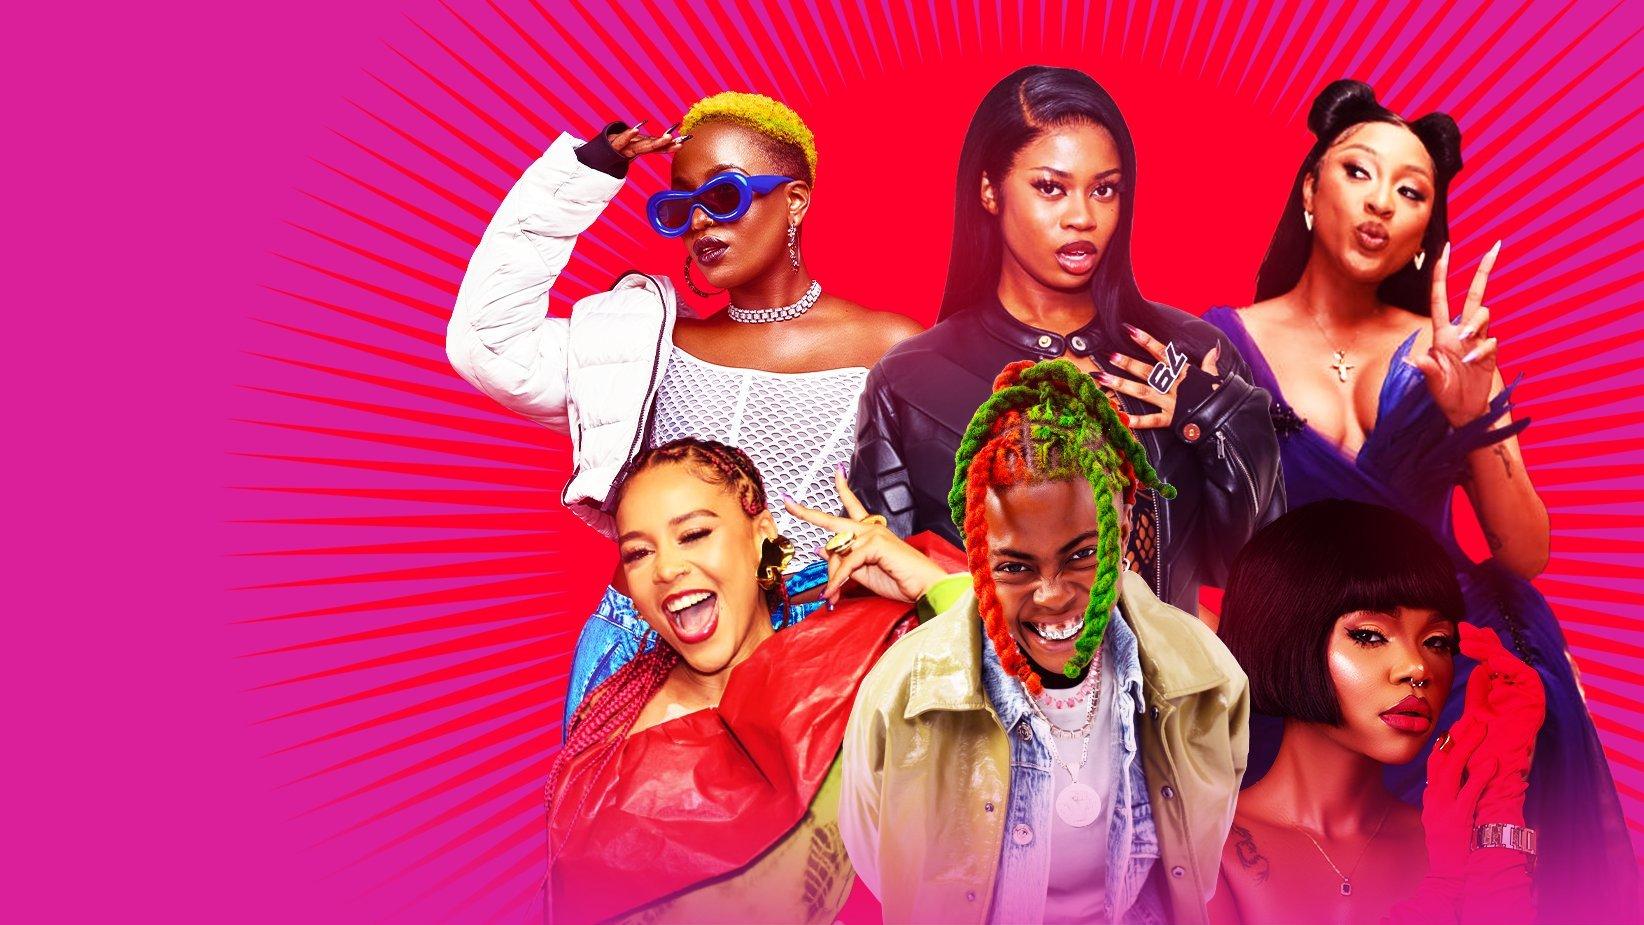 A collage photo of African women rappers (Clockwise from top-left): Femi One, Deto Black, Nadfiav Nakai, Candy Bleakz, Rosa Ree, Sho Madjozi